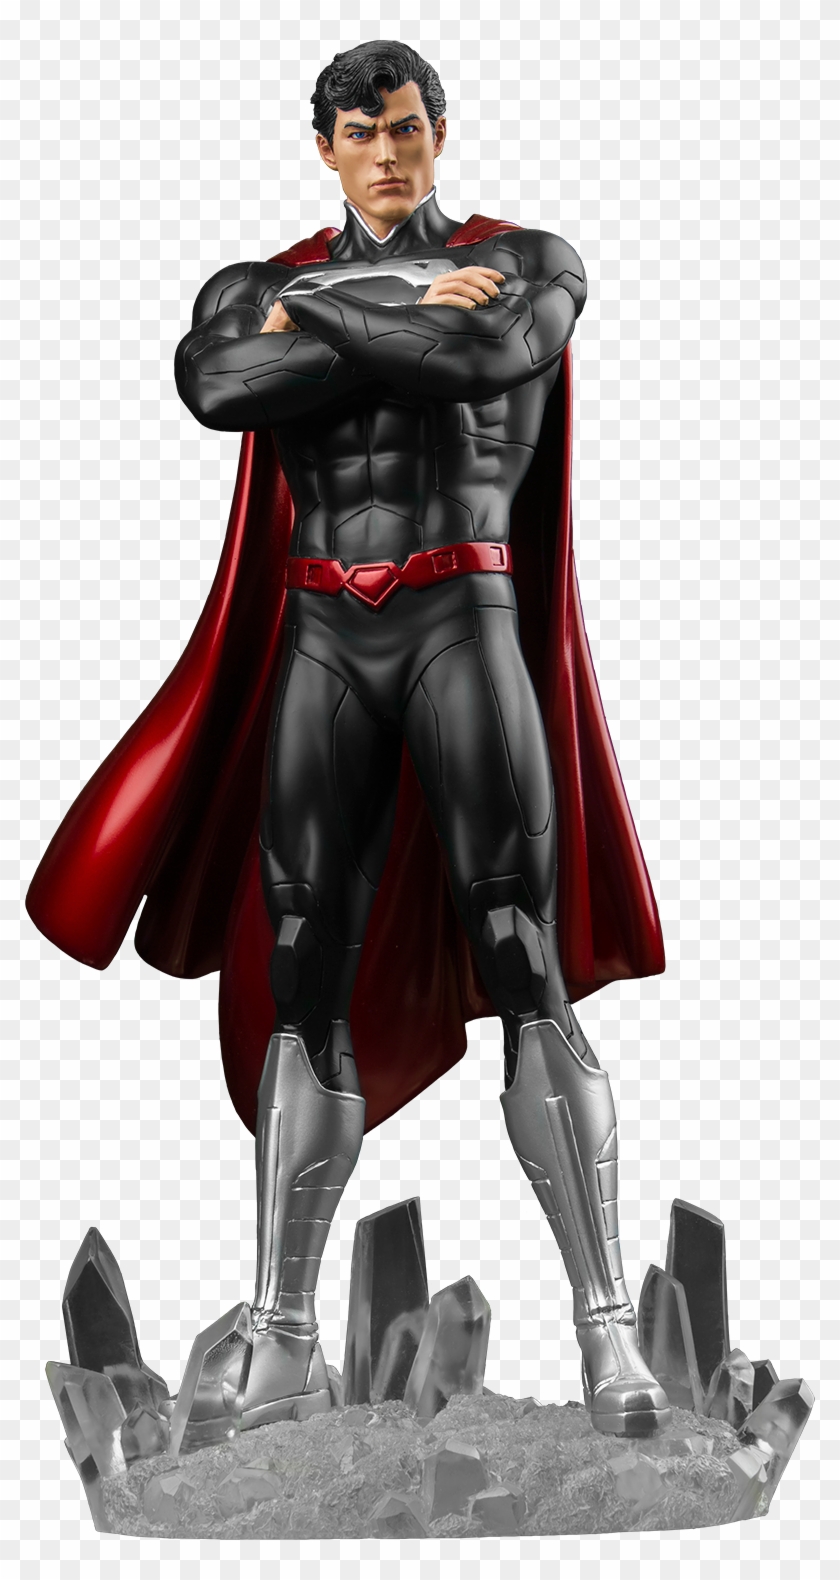 The New - New 52 Superman Black Suit Clipart #3938137